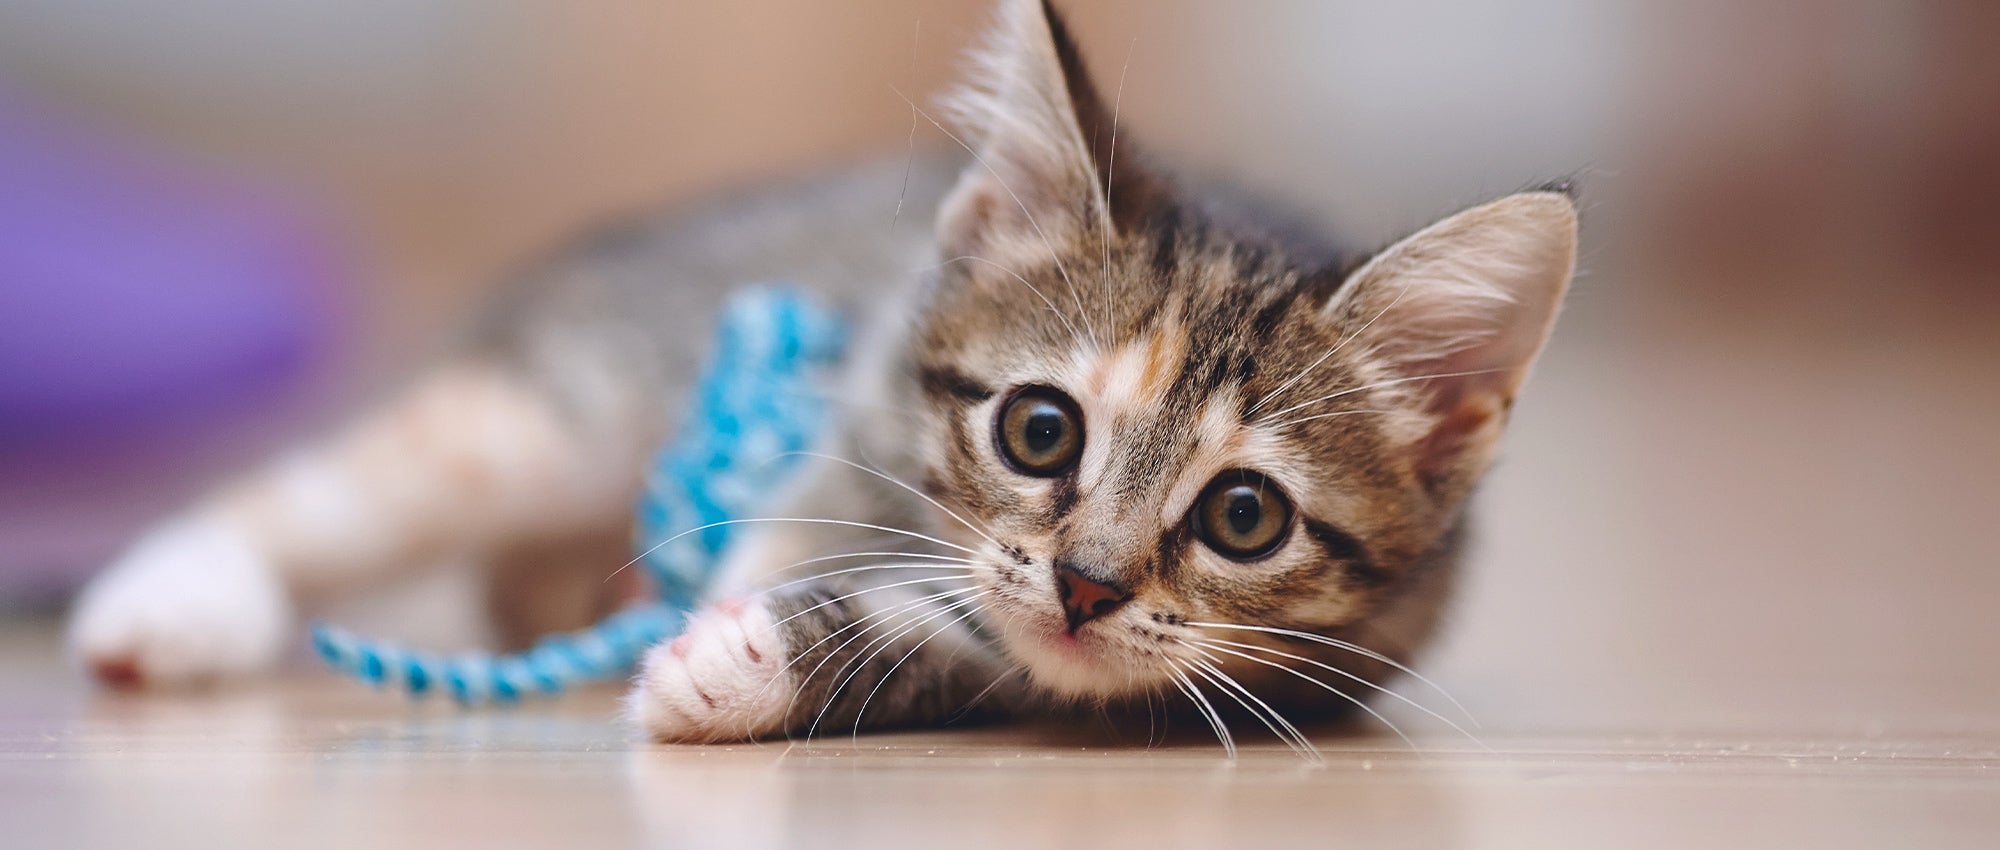 Teach Your Kitten How To Play Nice | The Humane Society Of The United States